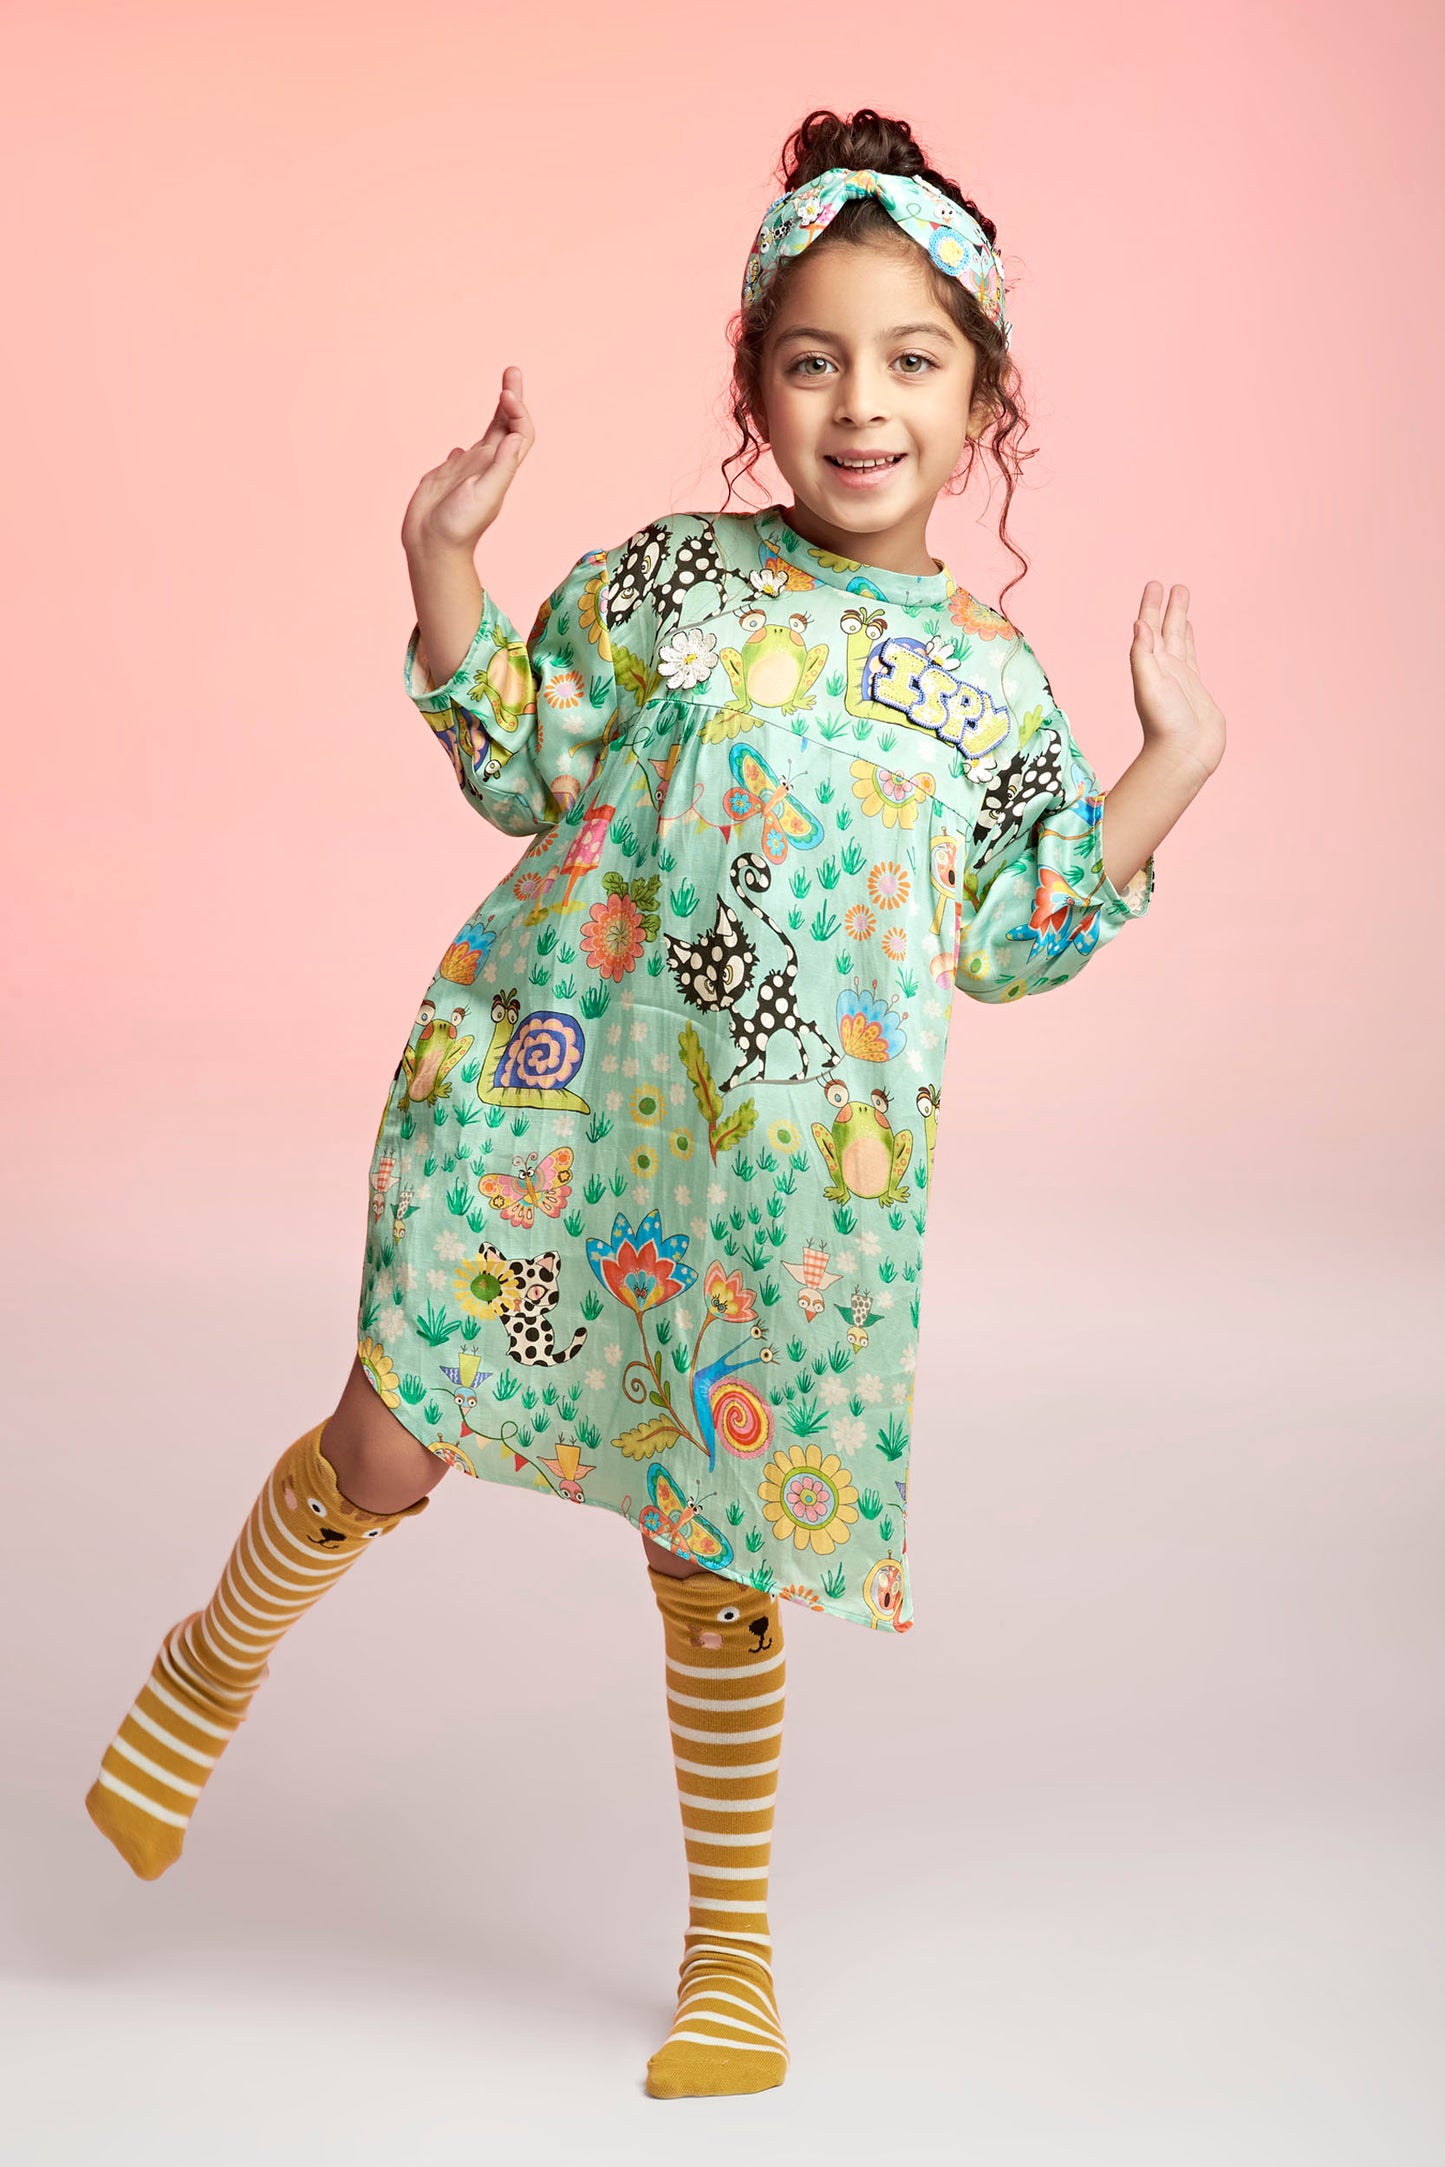 Once and Floral Printed Dress Mini Kids